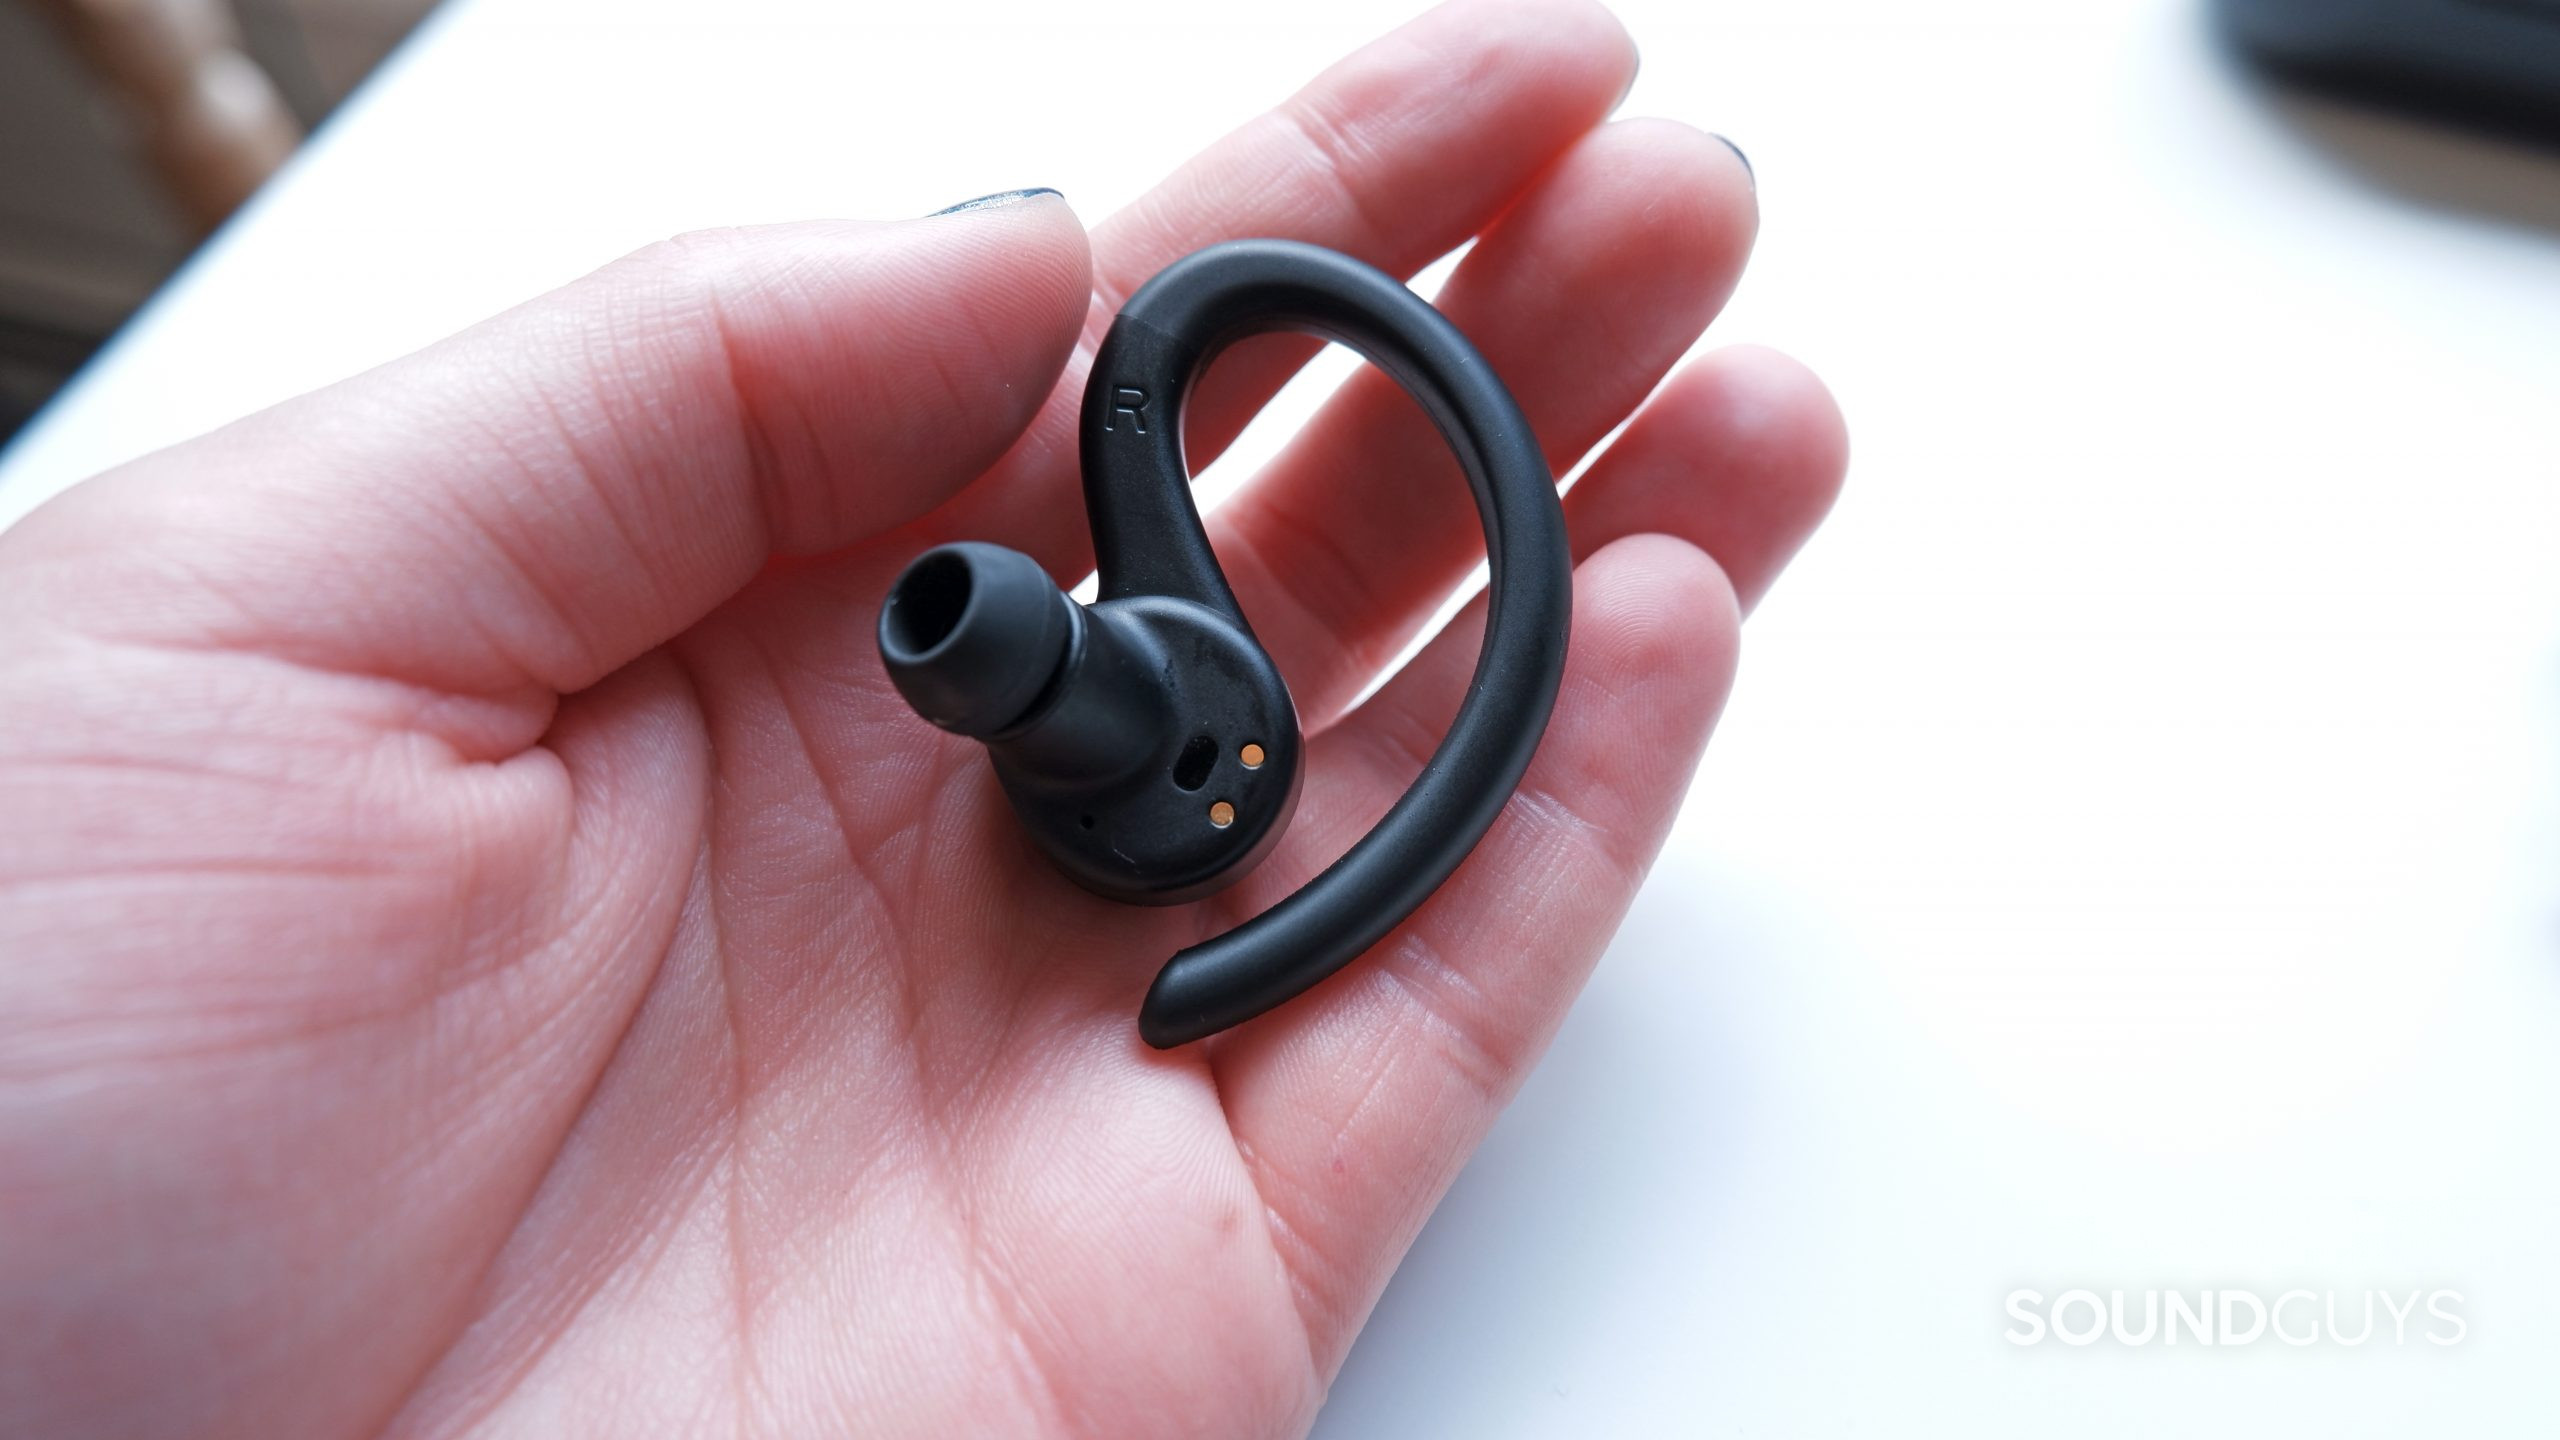 The JLab Epic Air Sport ANC in a hand, showing the inside of the earbud.